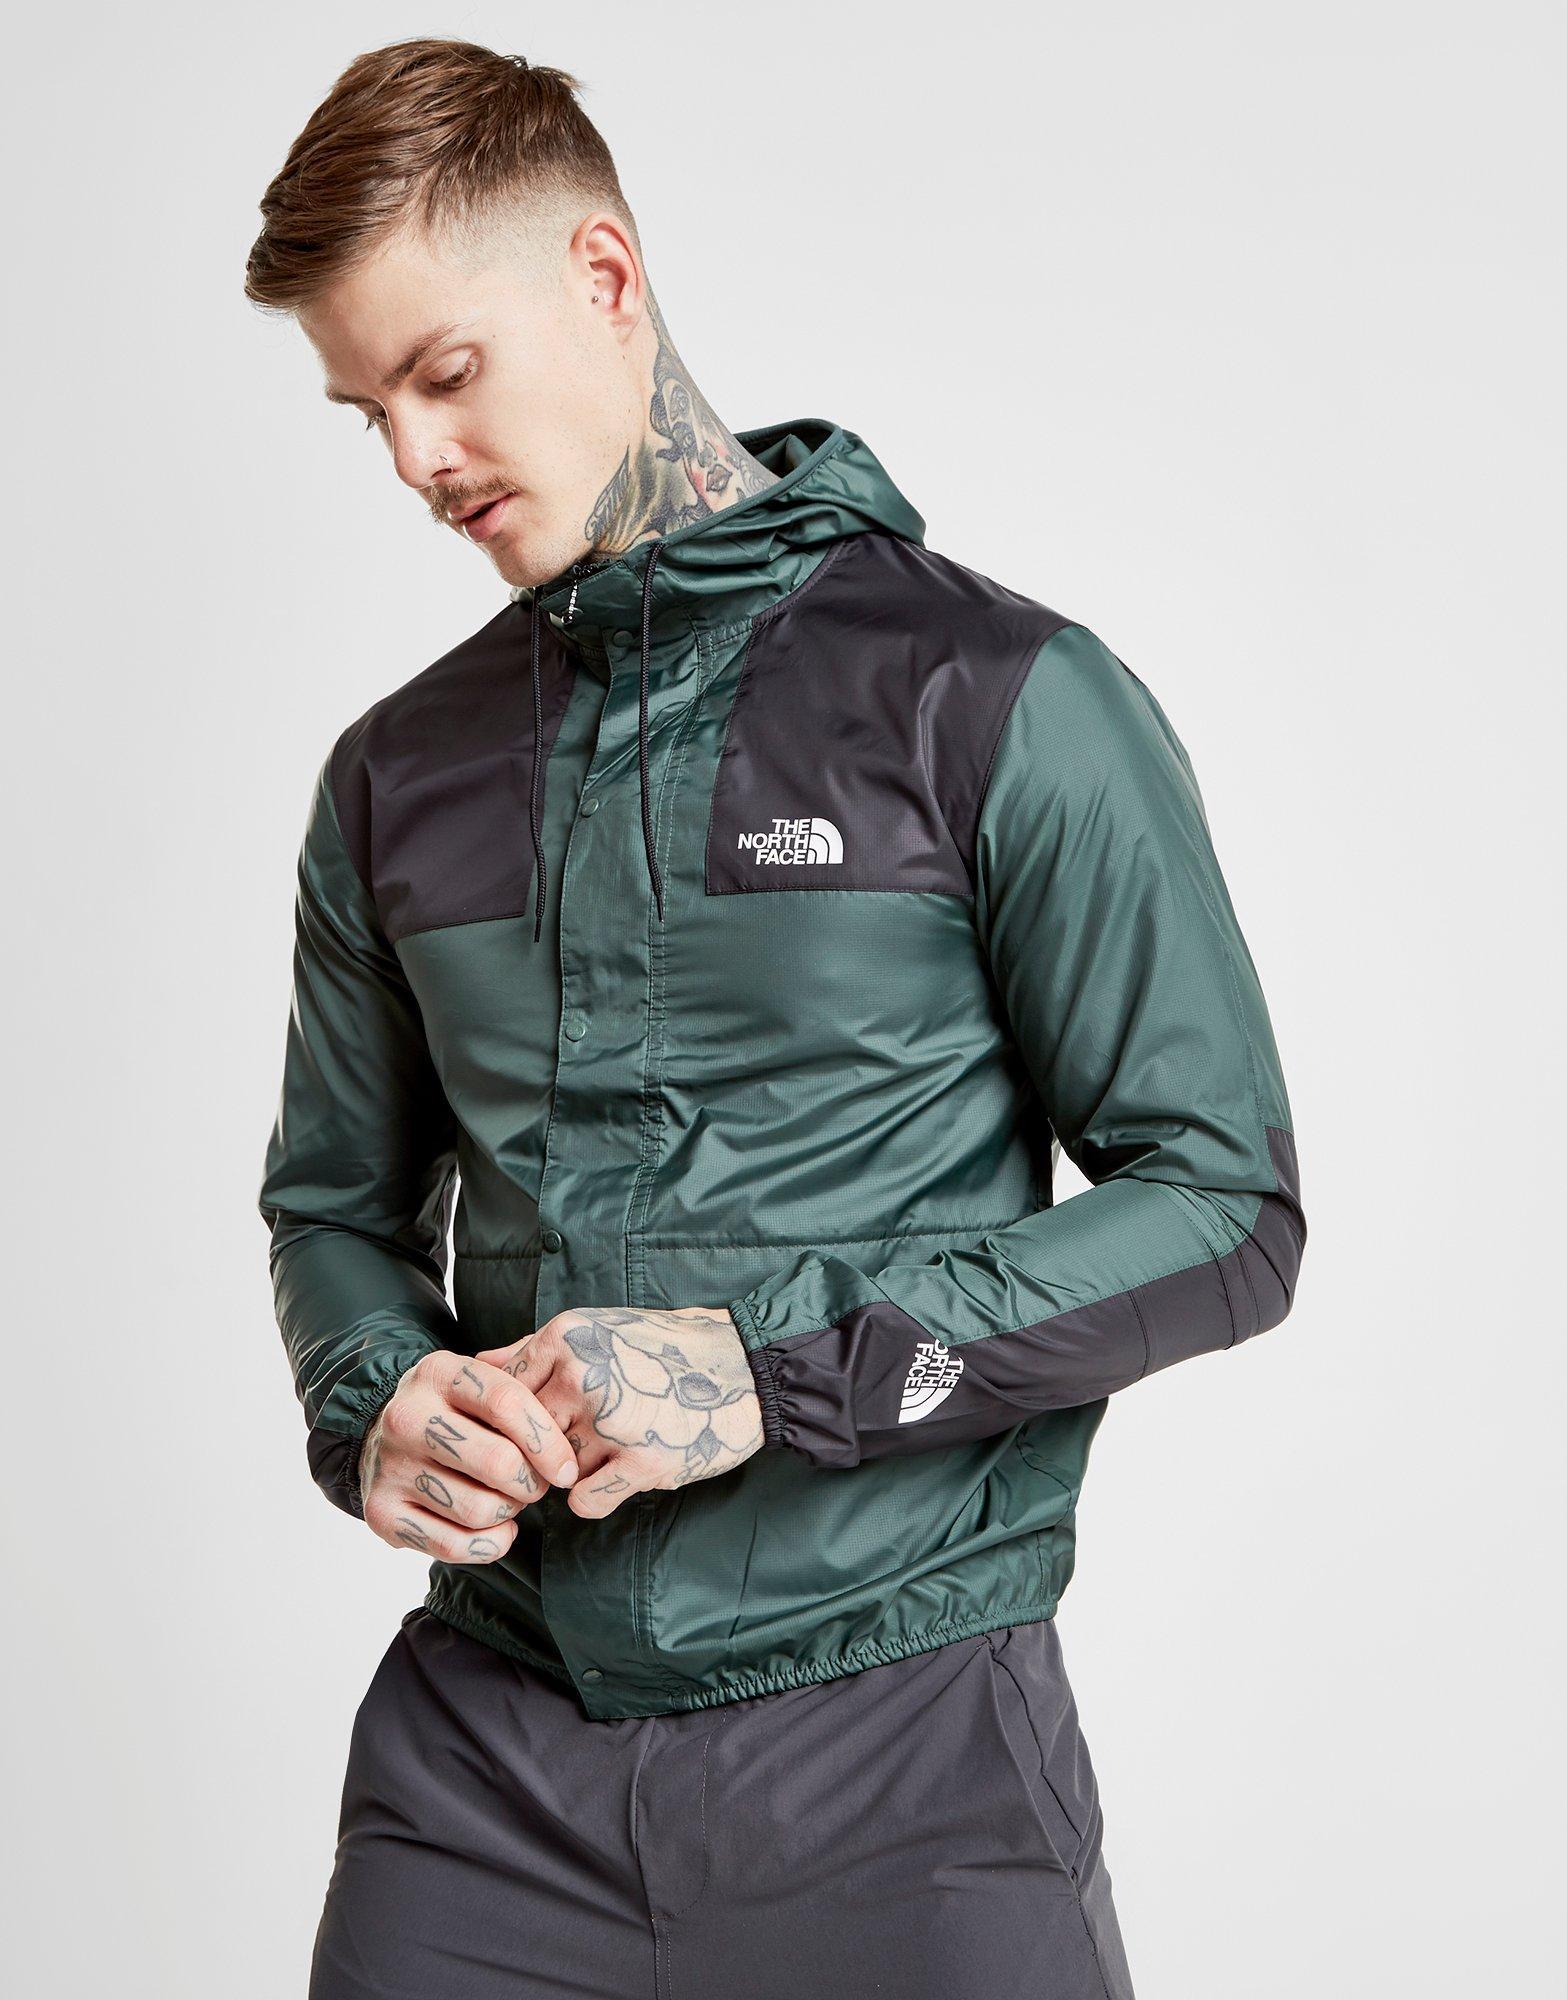 The North Face 1985 Seasonal Mountain Jacket Green on Sale, SAVE 55%.